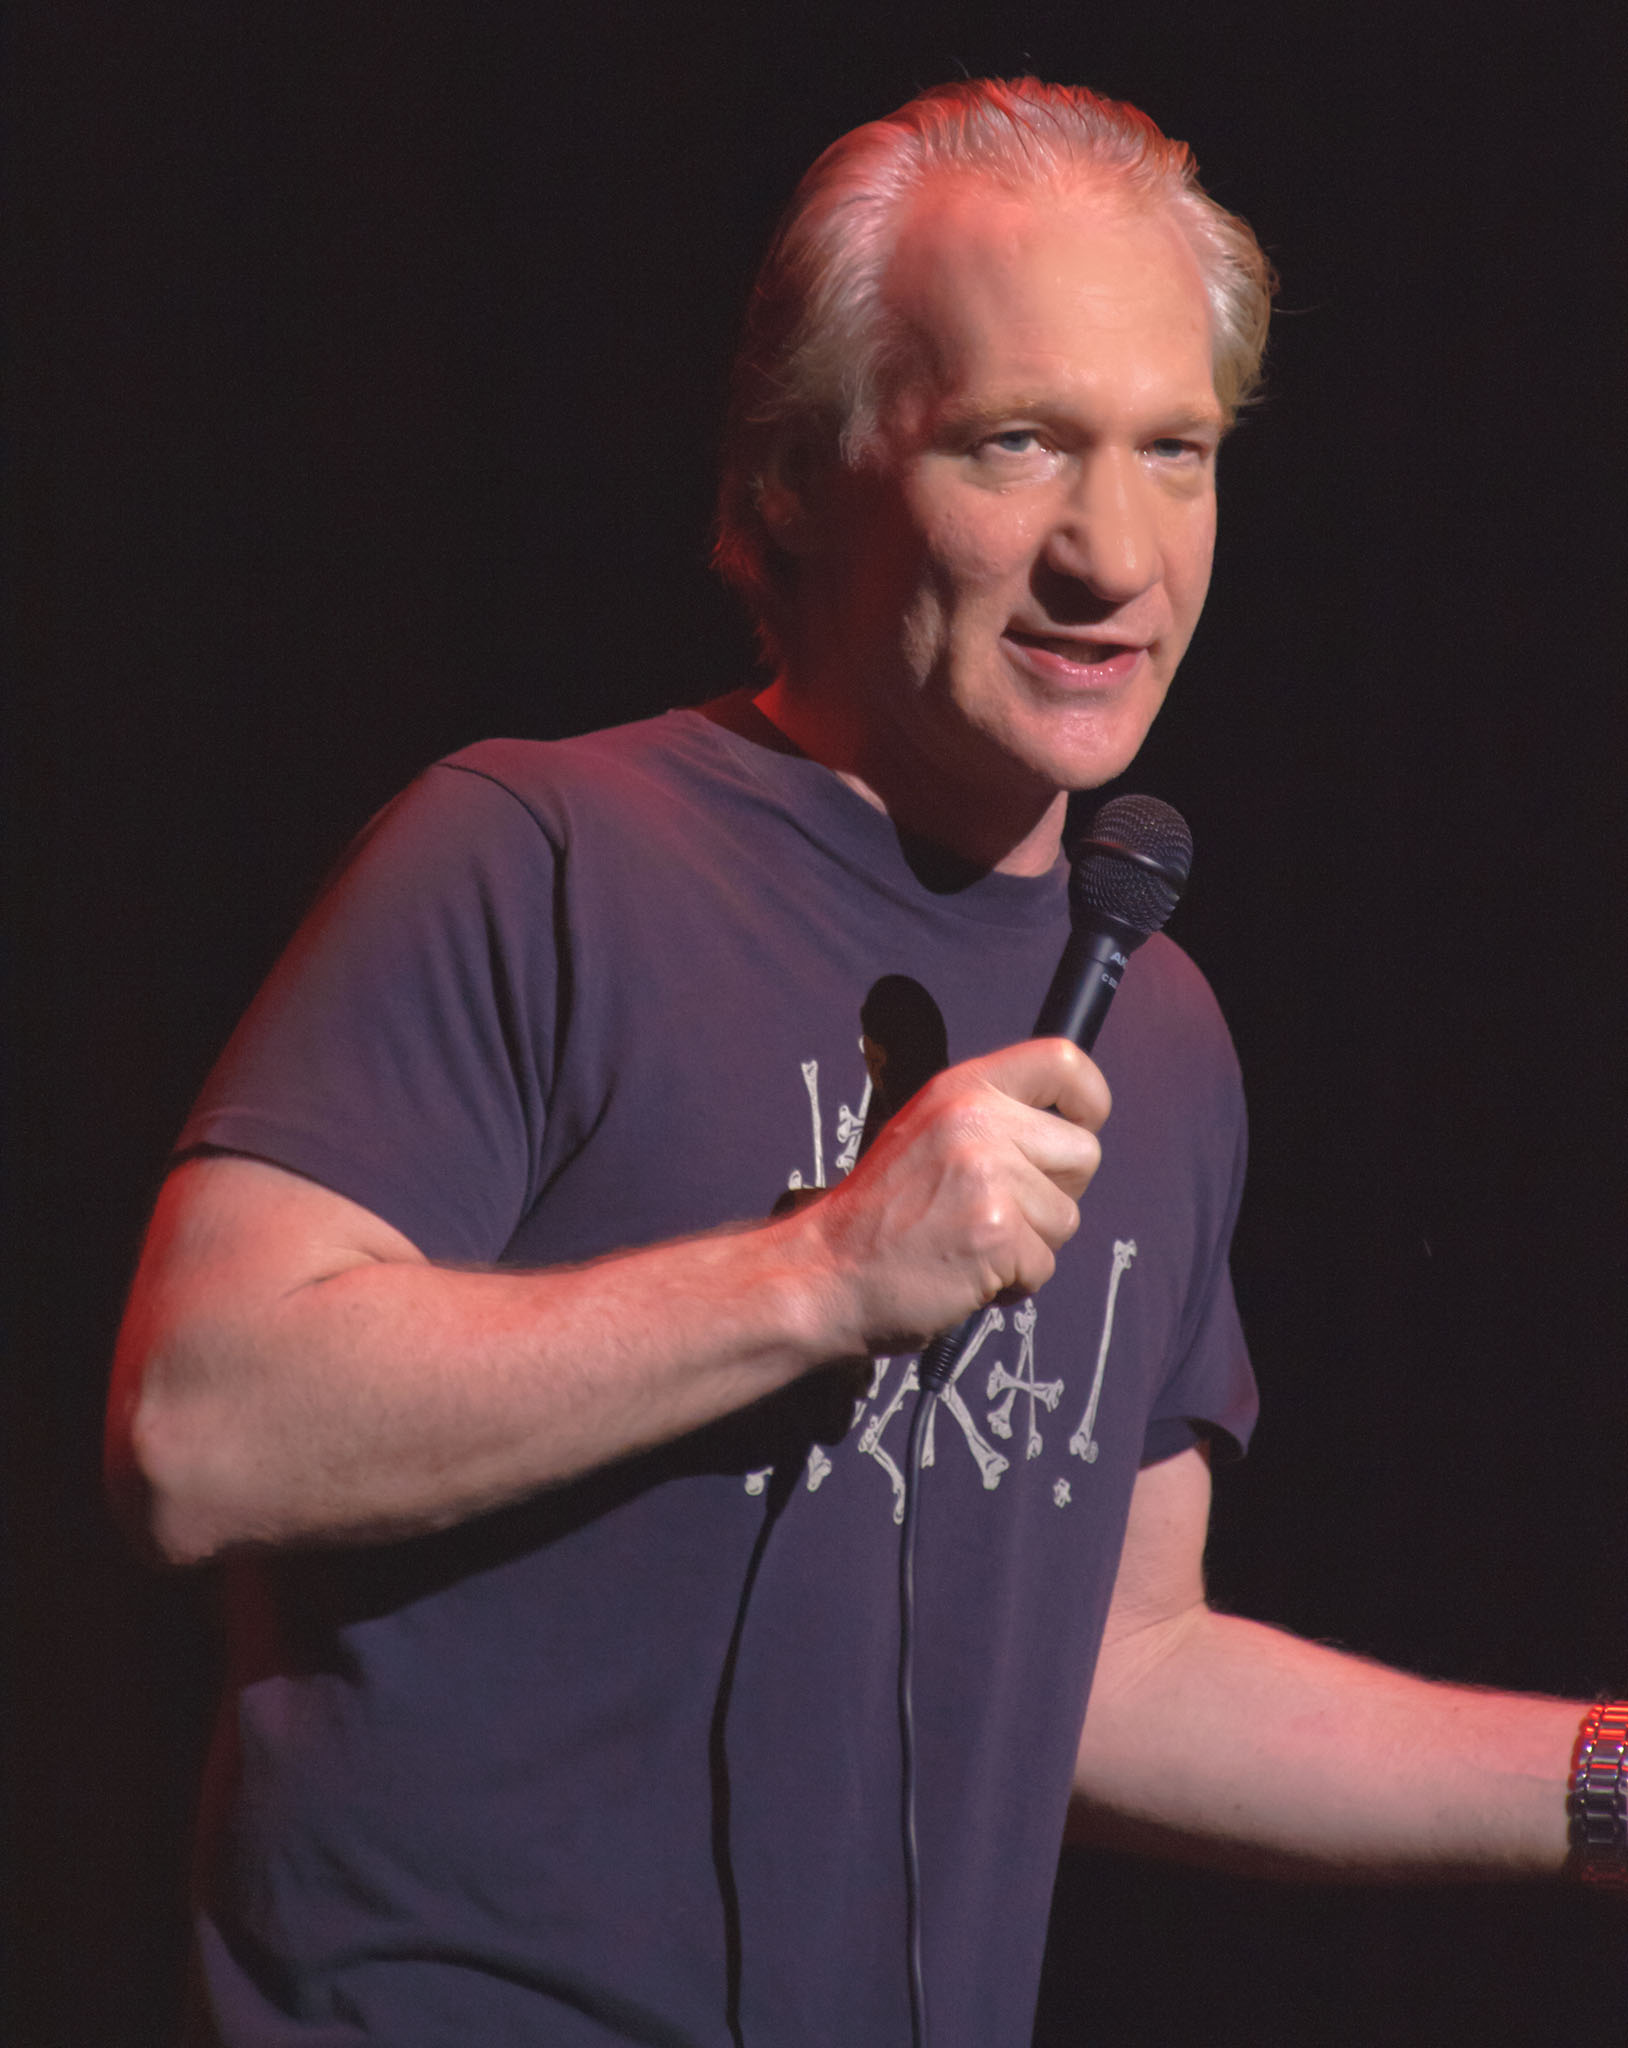 Known for his political satire and sociopolitical commentary, Bill Maher has amassed his net worth not only from his shows but also from acquiring a minority stake in the New York Mets